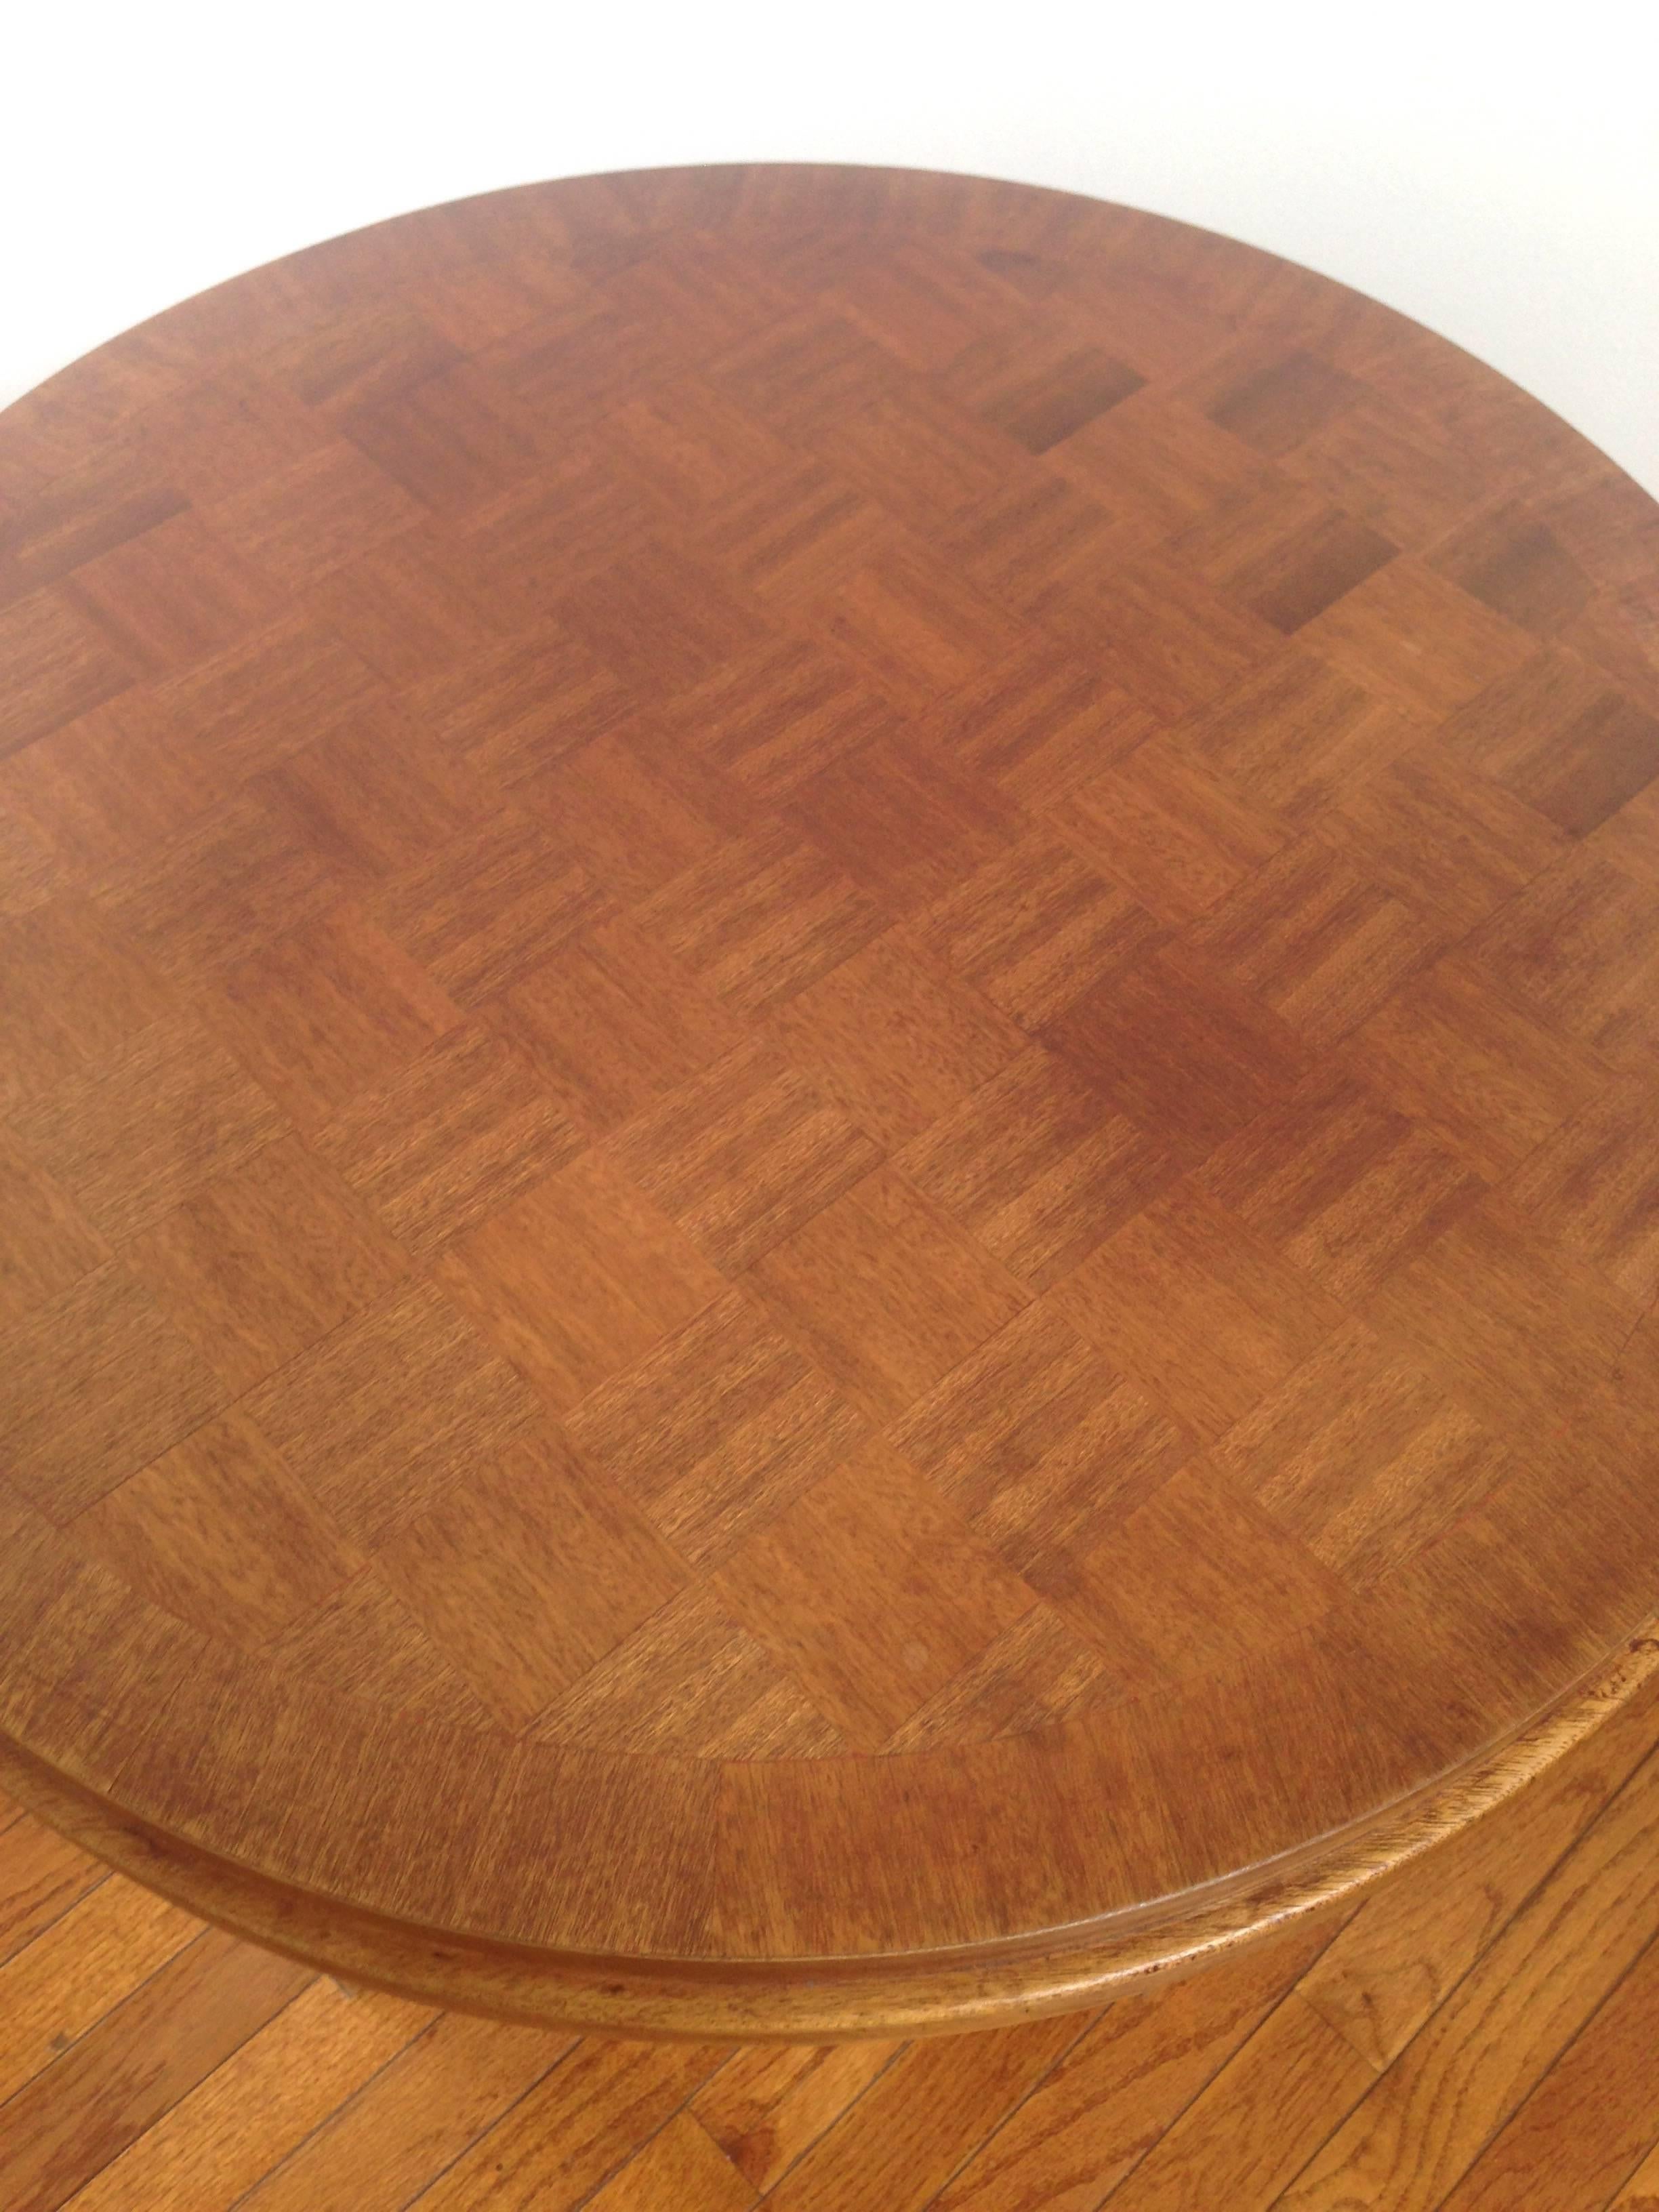 Dominique or Adnet Style French Gueridon or Round Table For Sale 3